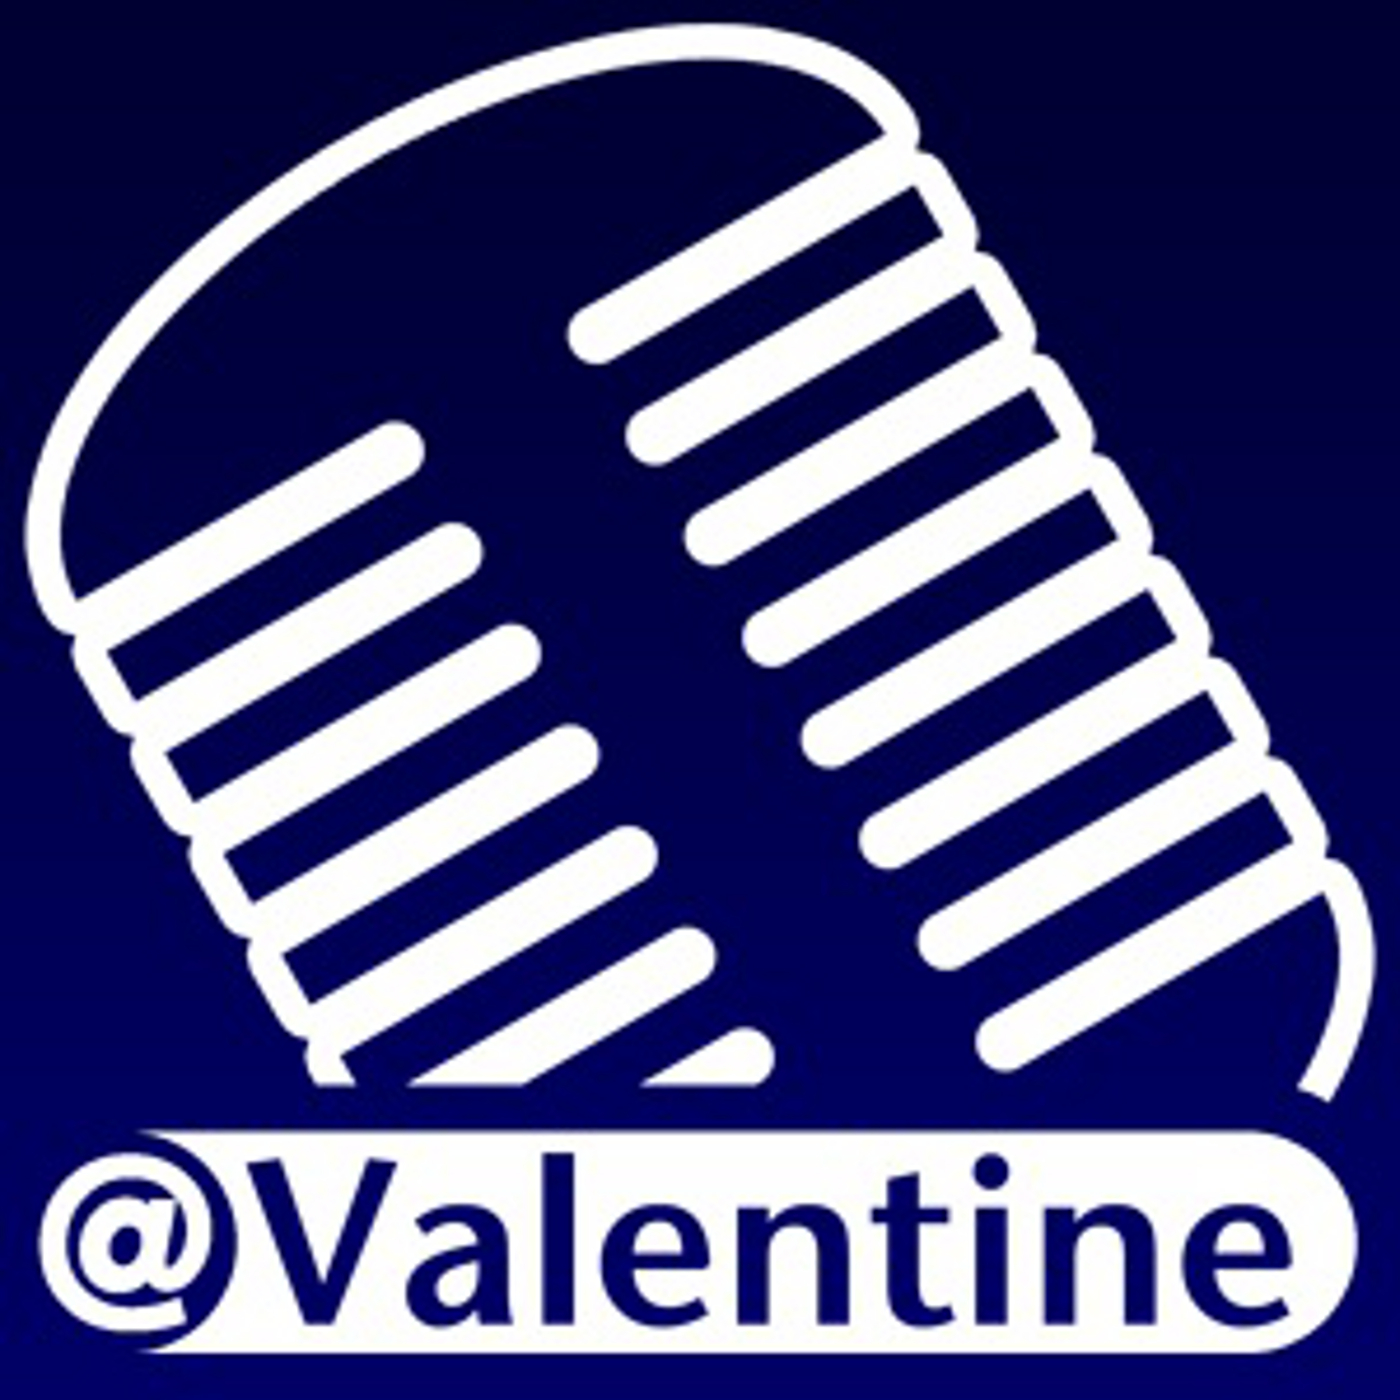 ValentineCast Episode #222 - It's Been A While (corrected so sorry folks.)